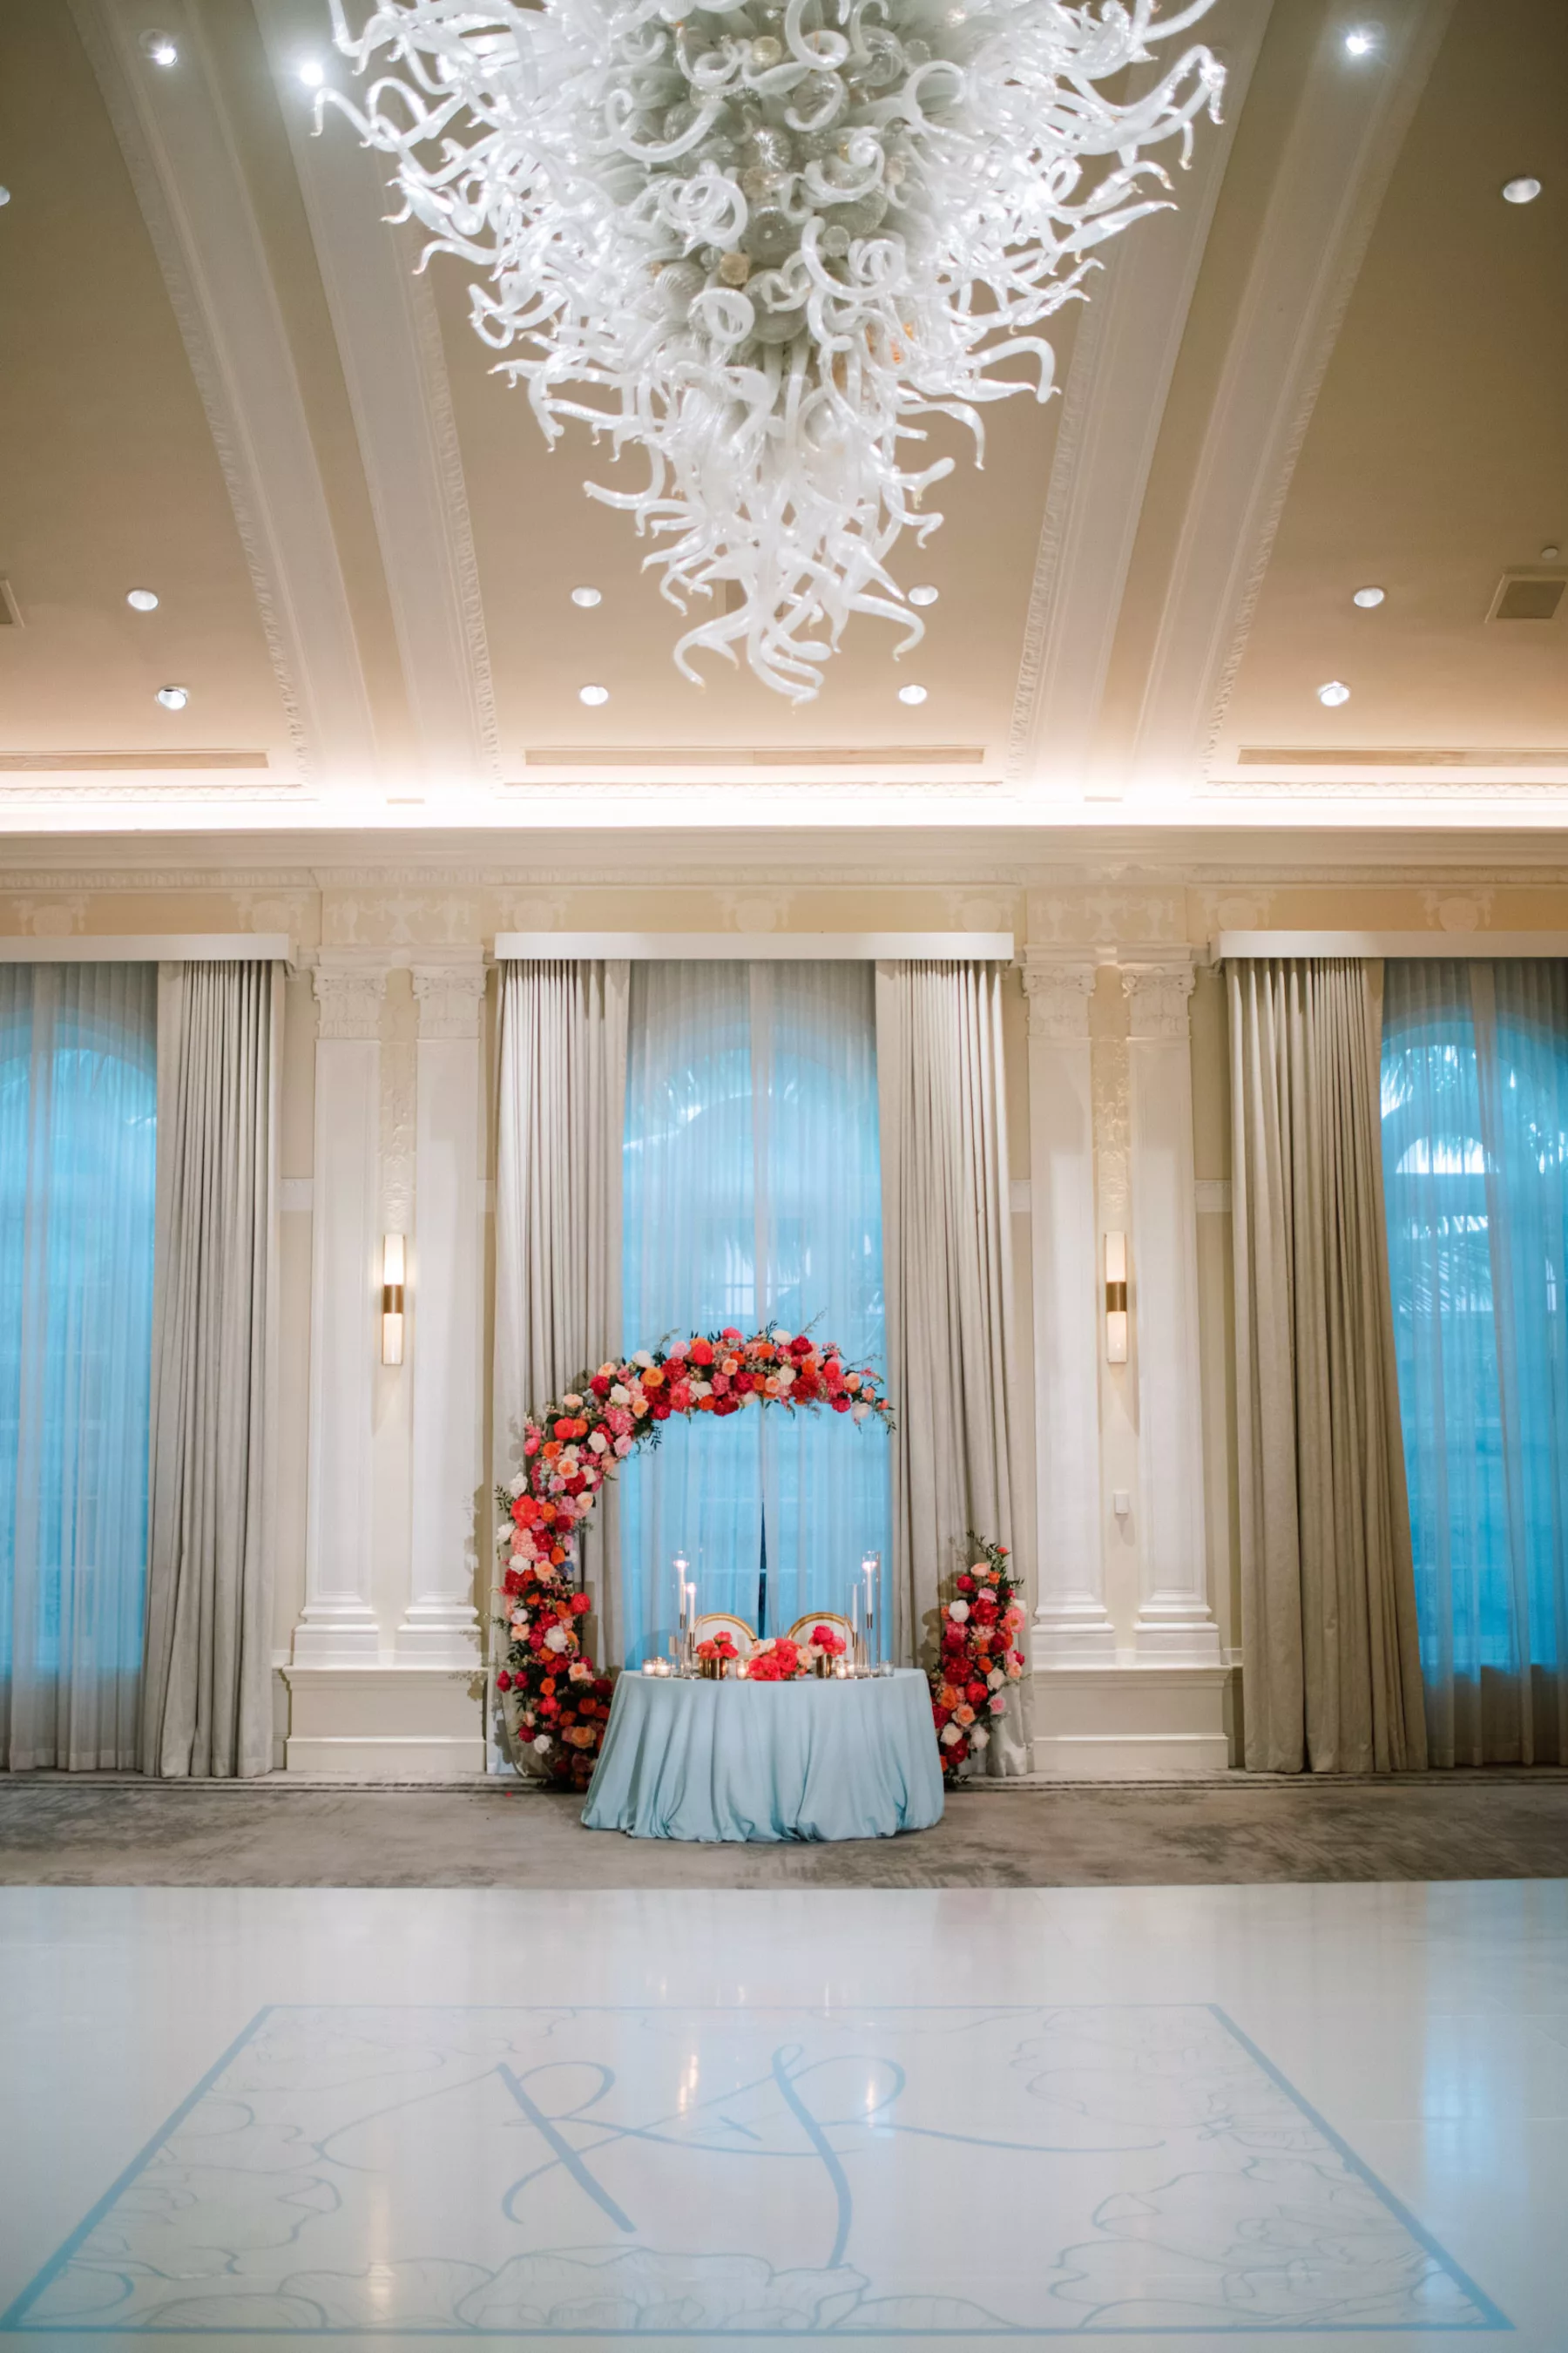 Luxurious Pink and Blue Summer Ballroom Wedding Reception Sweetheart Table Decor Ideas | Round Backdrop with Pink Hydrangeas and Orange Garden Roses | Tampa Bay Florist Bruce Wayne Florals | Event Planner Parties A La Carte | Kate Ryan Event Rentals | Venue The Vinoy